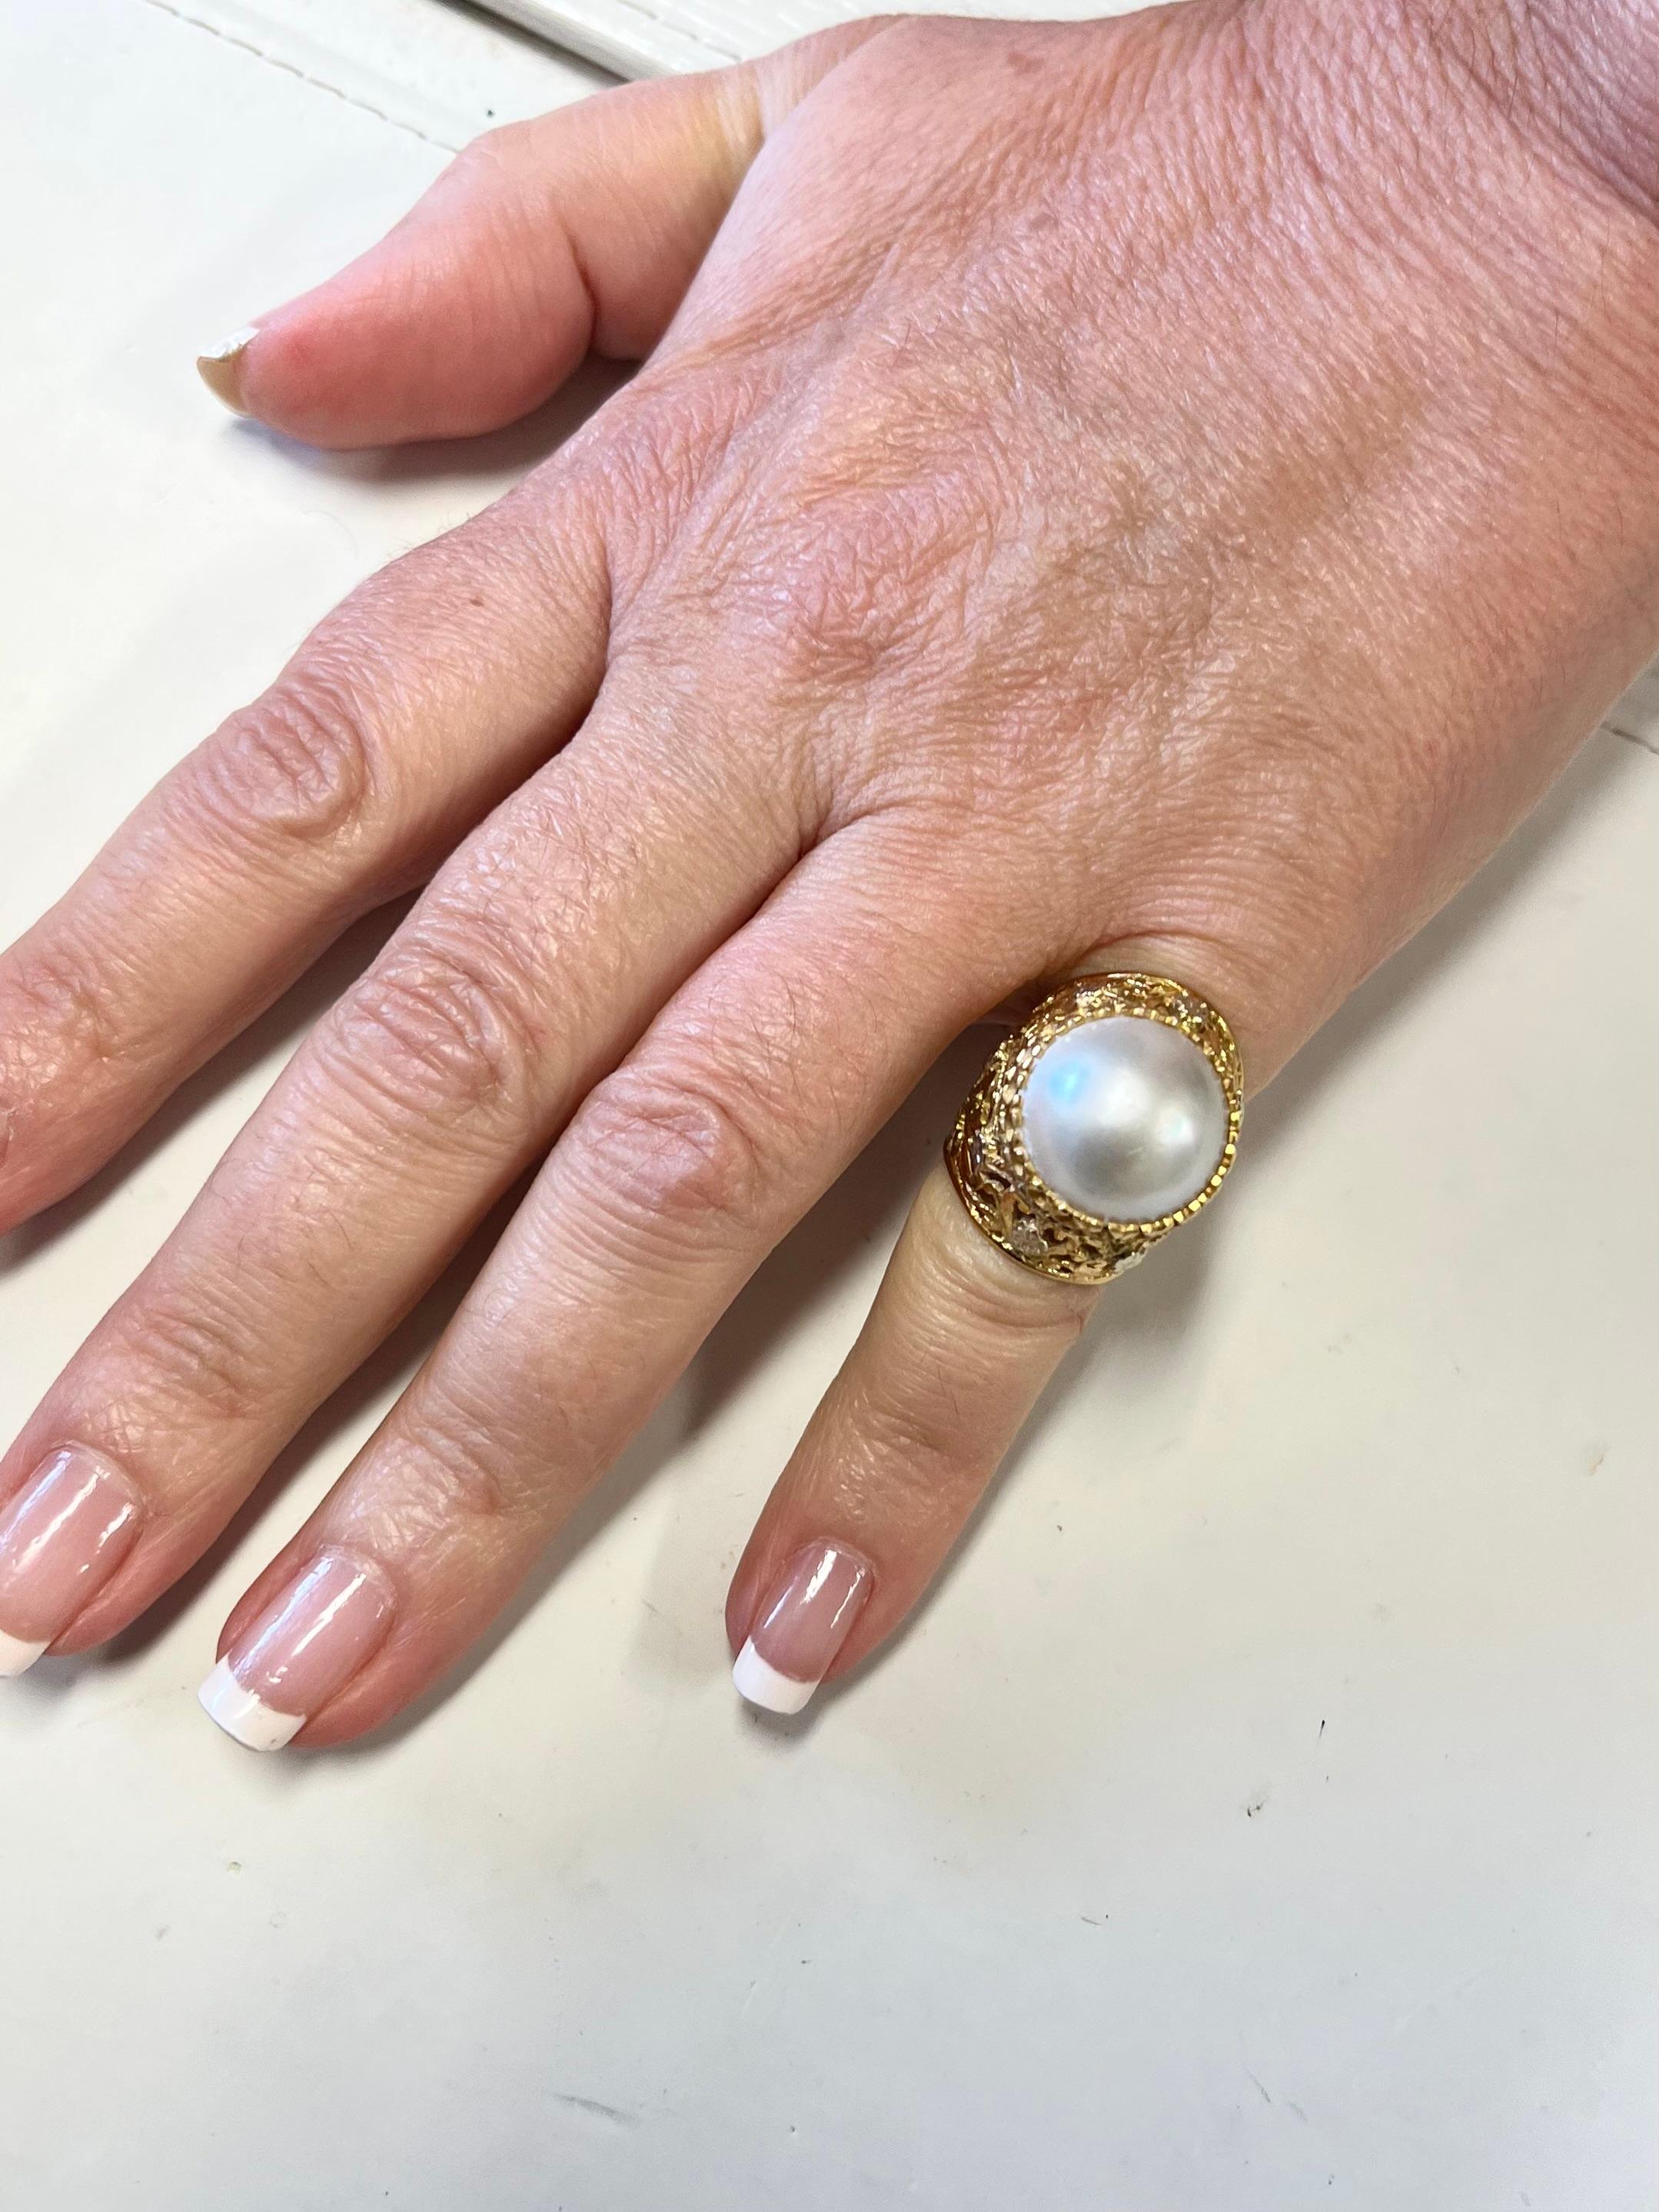 Vintage Floral White Pearl Pinky Ring in 18k Yellow Gold Bezel Setting In Excellent Condition For Sale In Miami, FL